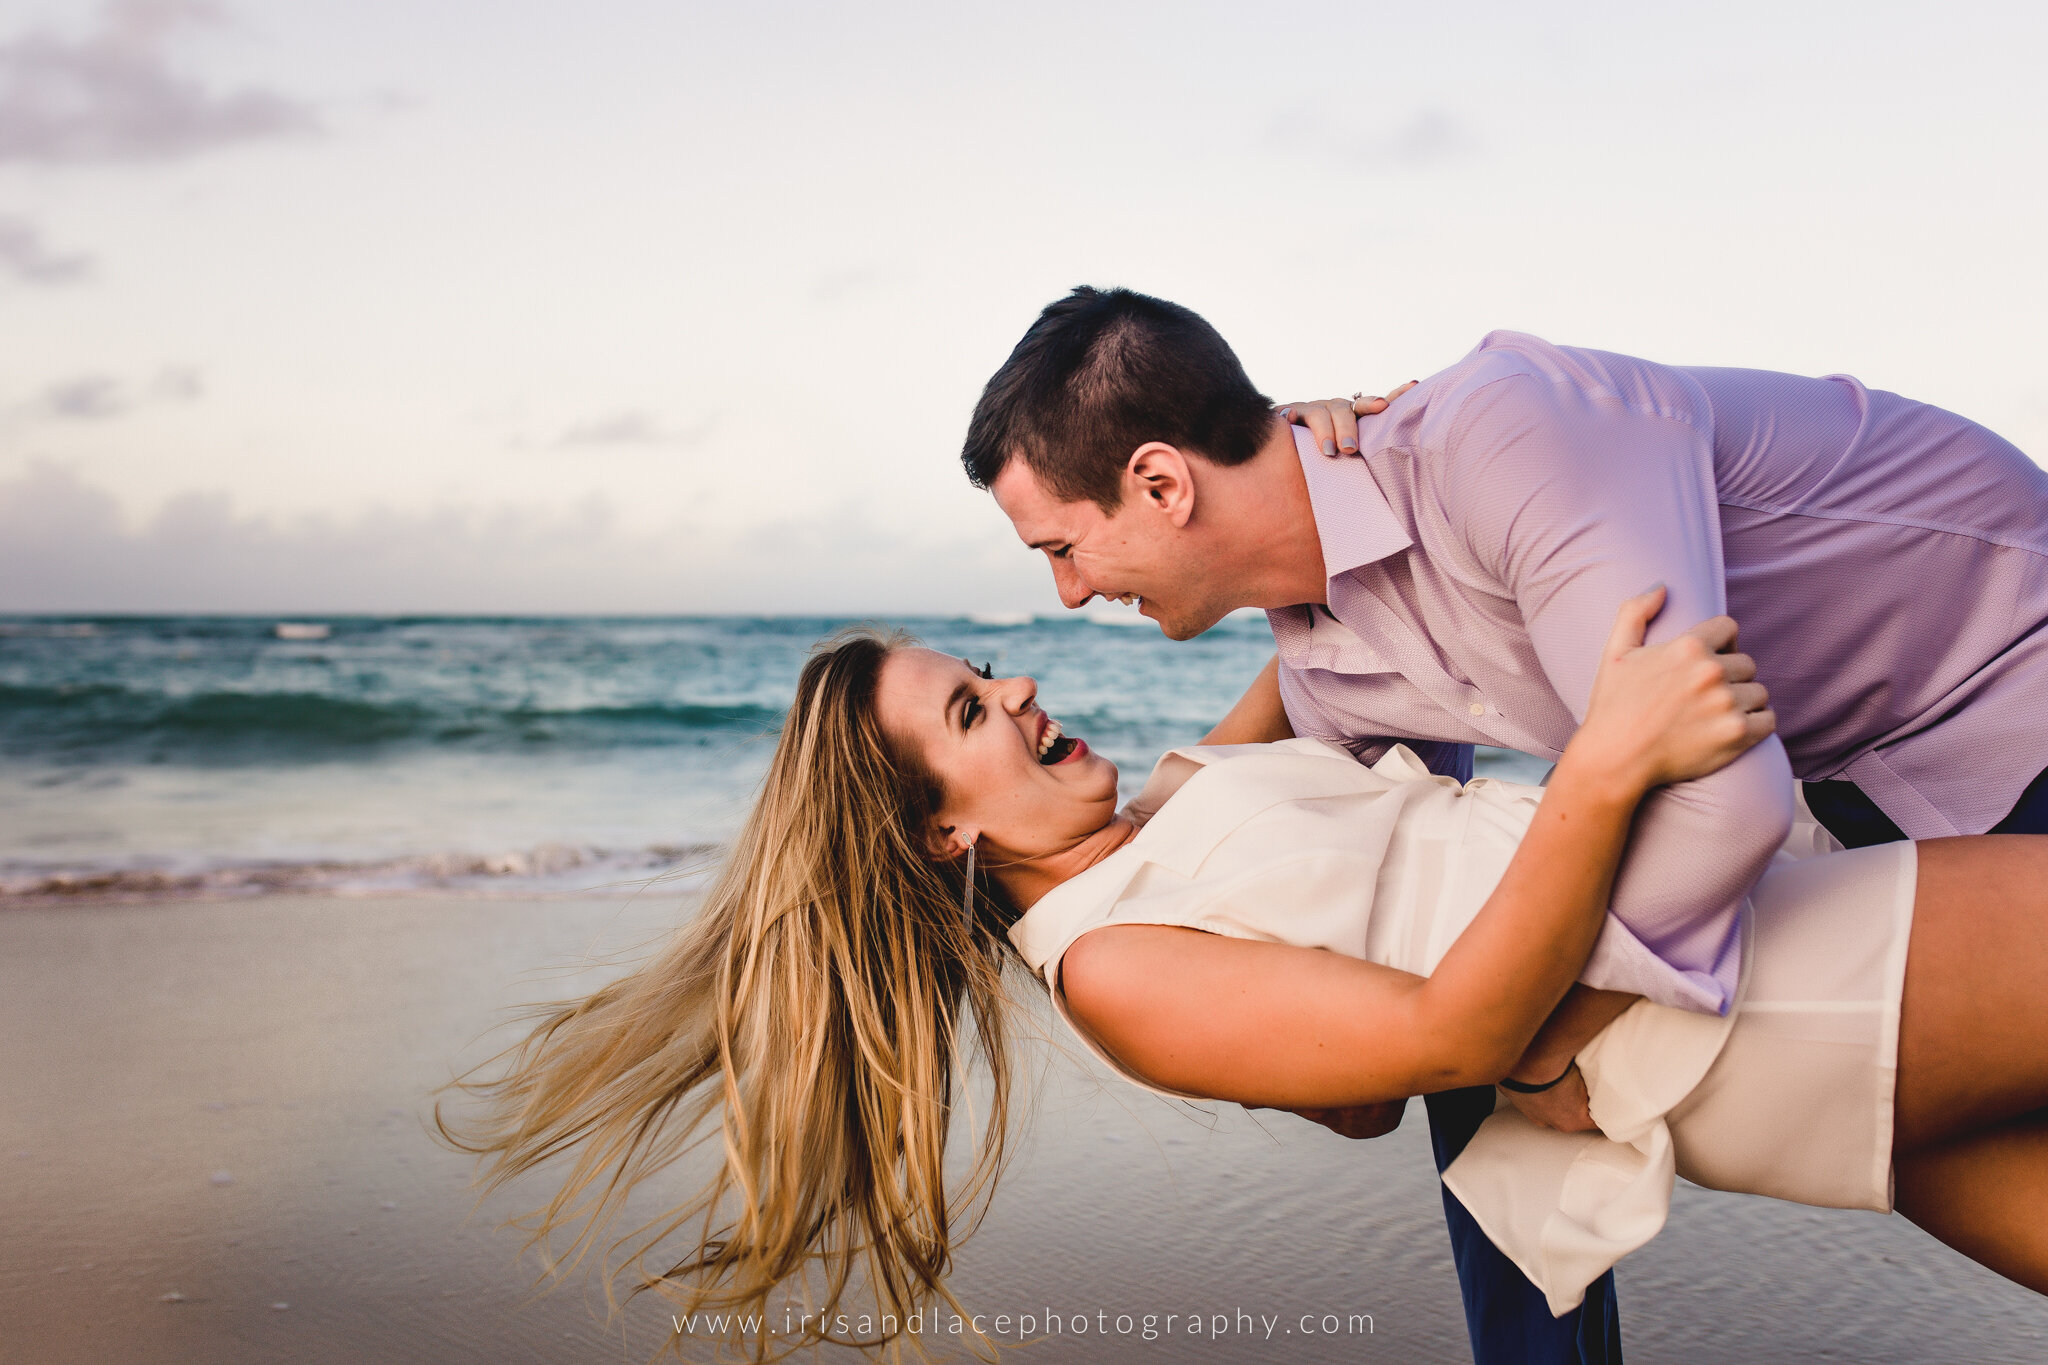 Engagement Photos on the beach  |  NorCal Travel Photographer  |  Iris and Lace Photography